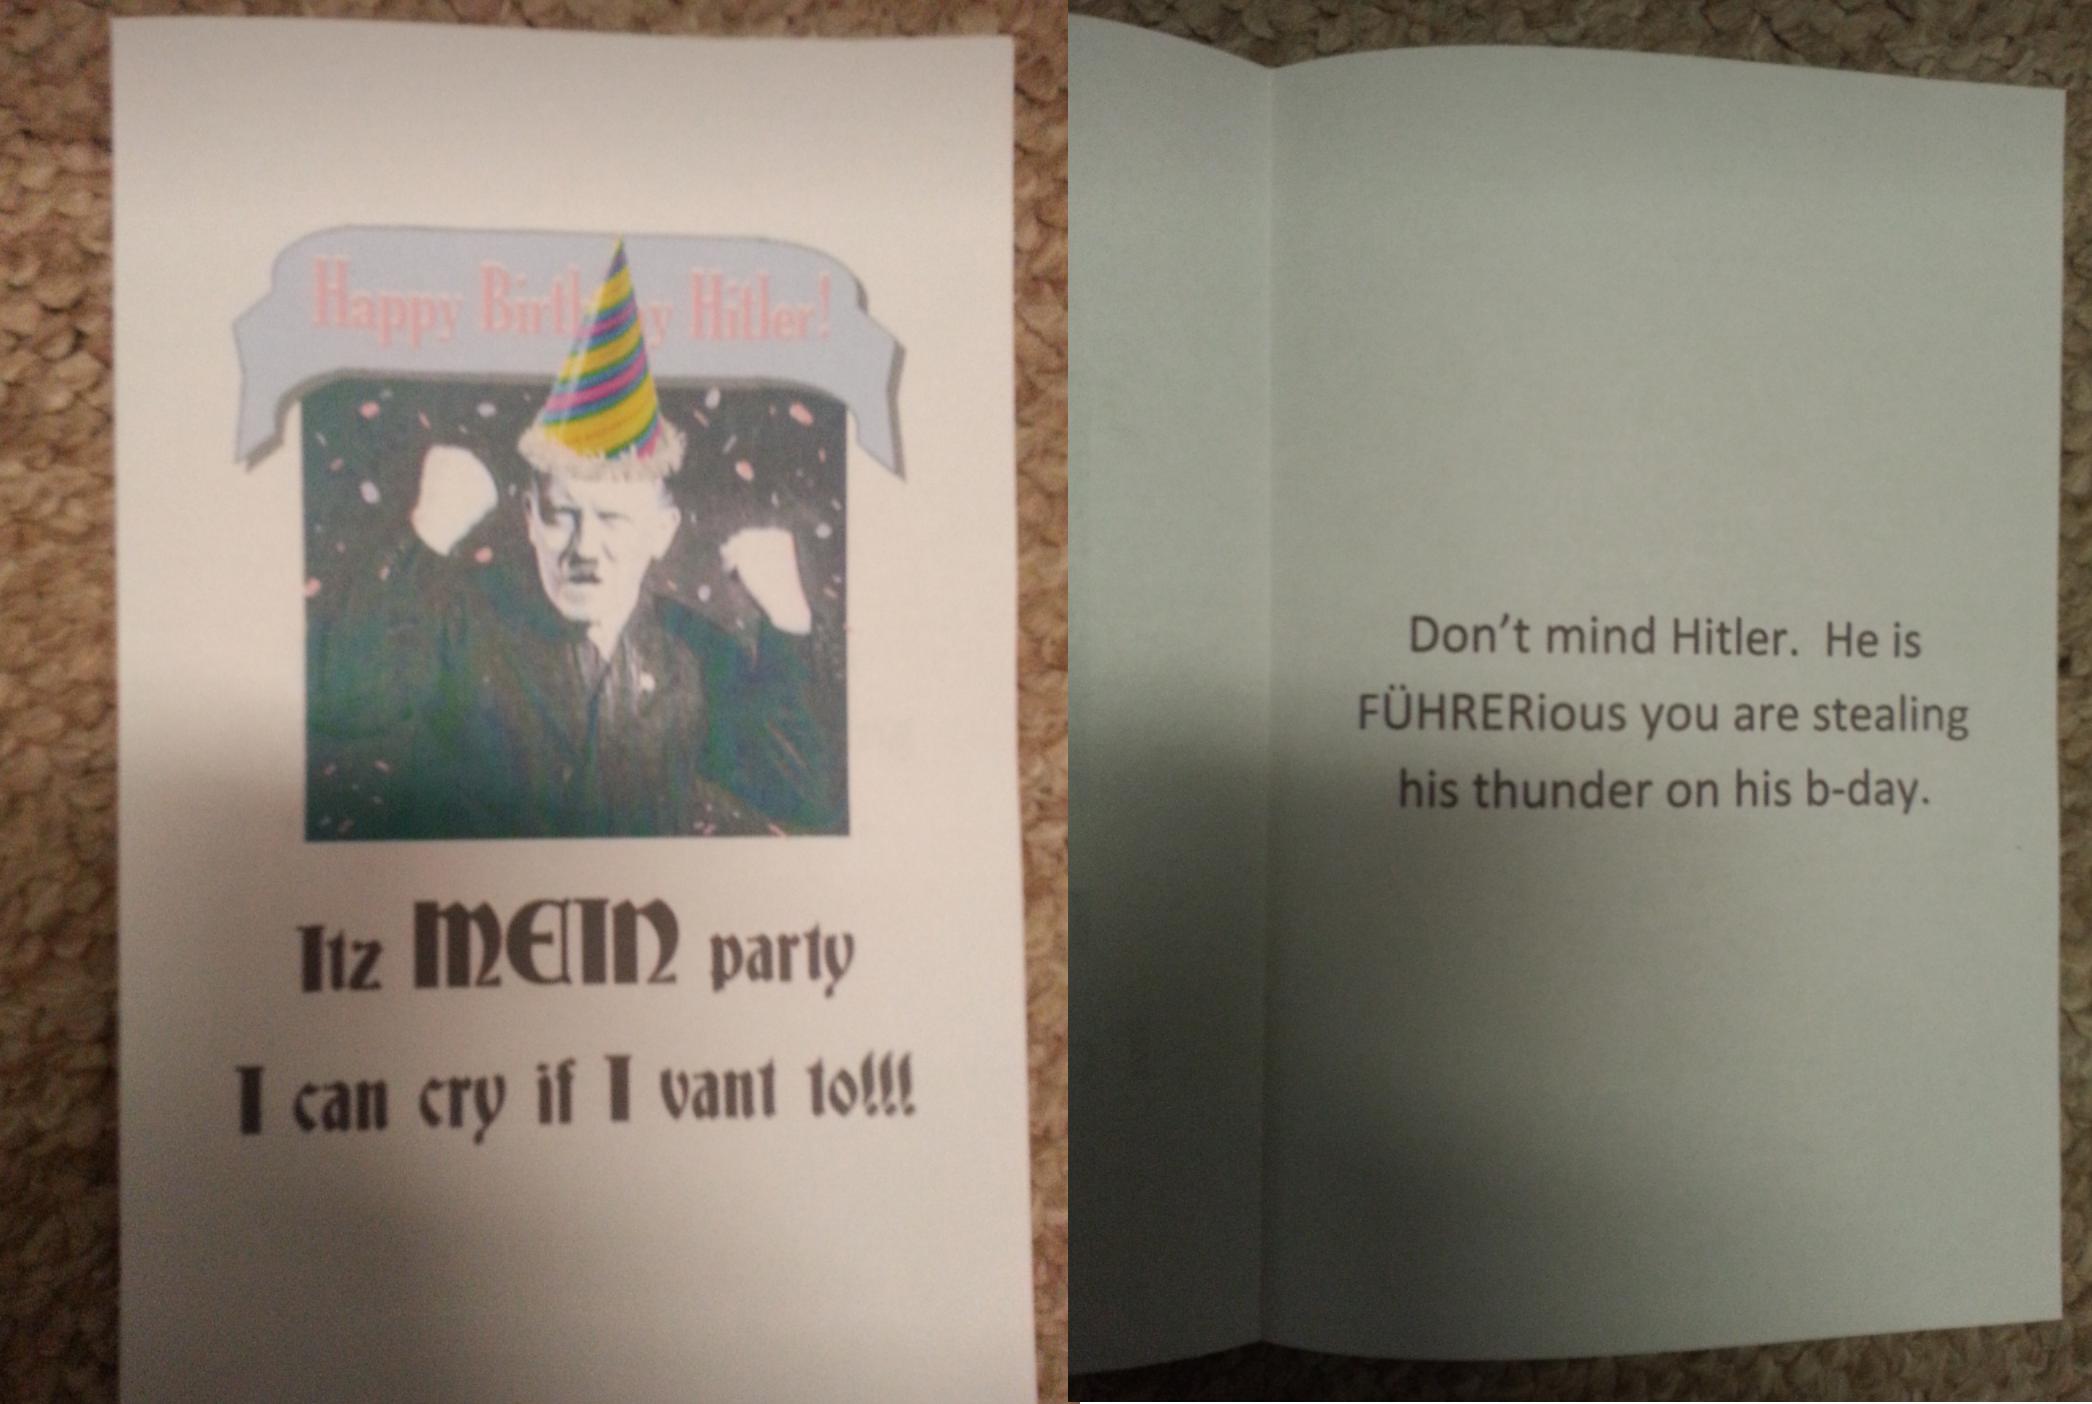 hitler birthday card - Don't mind Hitler. He is FHRERious you are stealing his thunder on his bday. Tiz mein party I can cry if I vant toll!